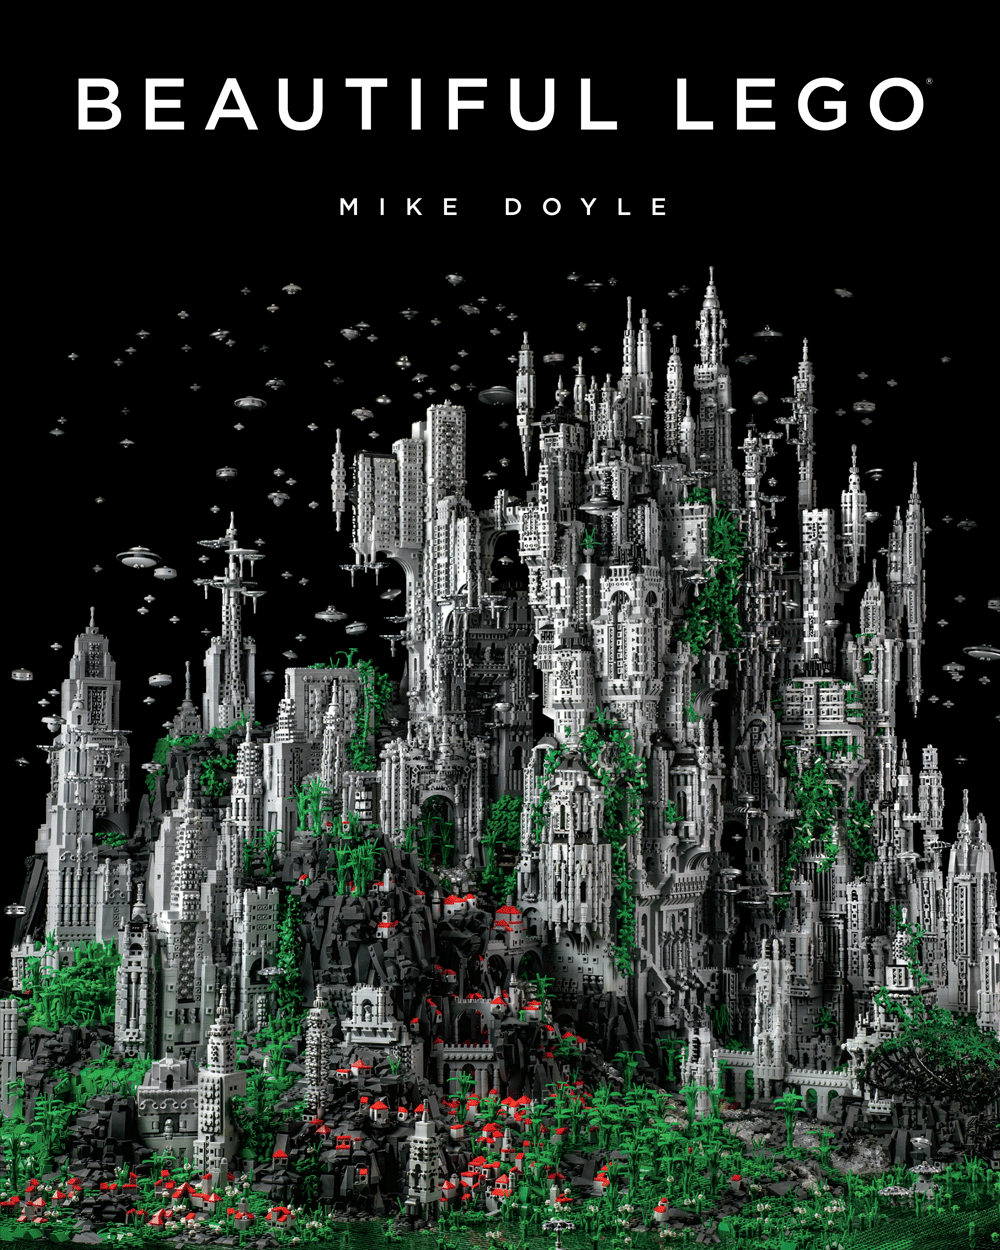 Book Review: Beautiful Lego